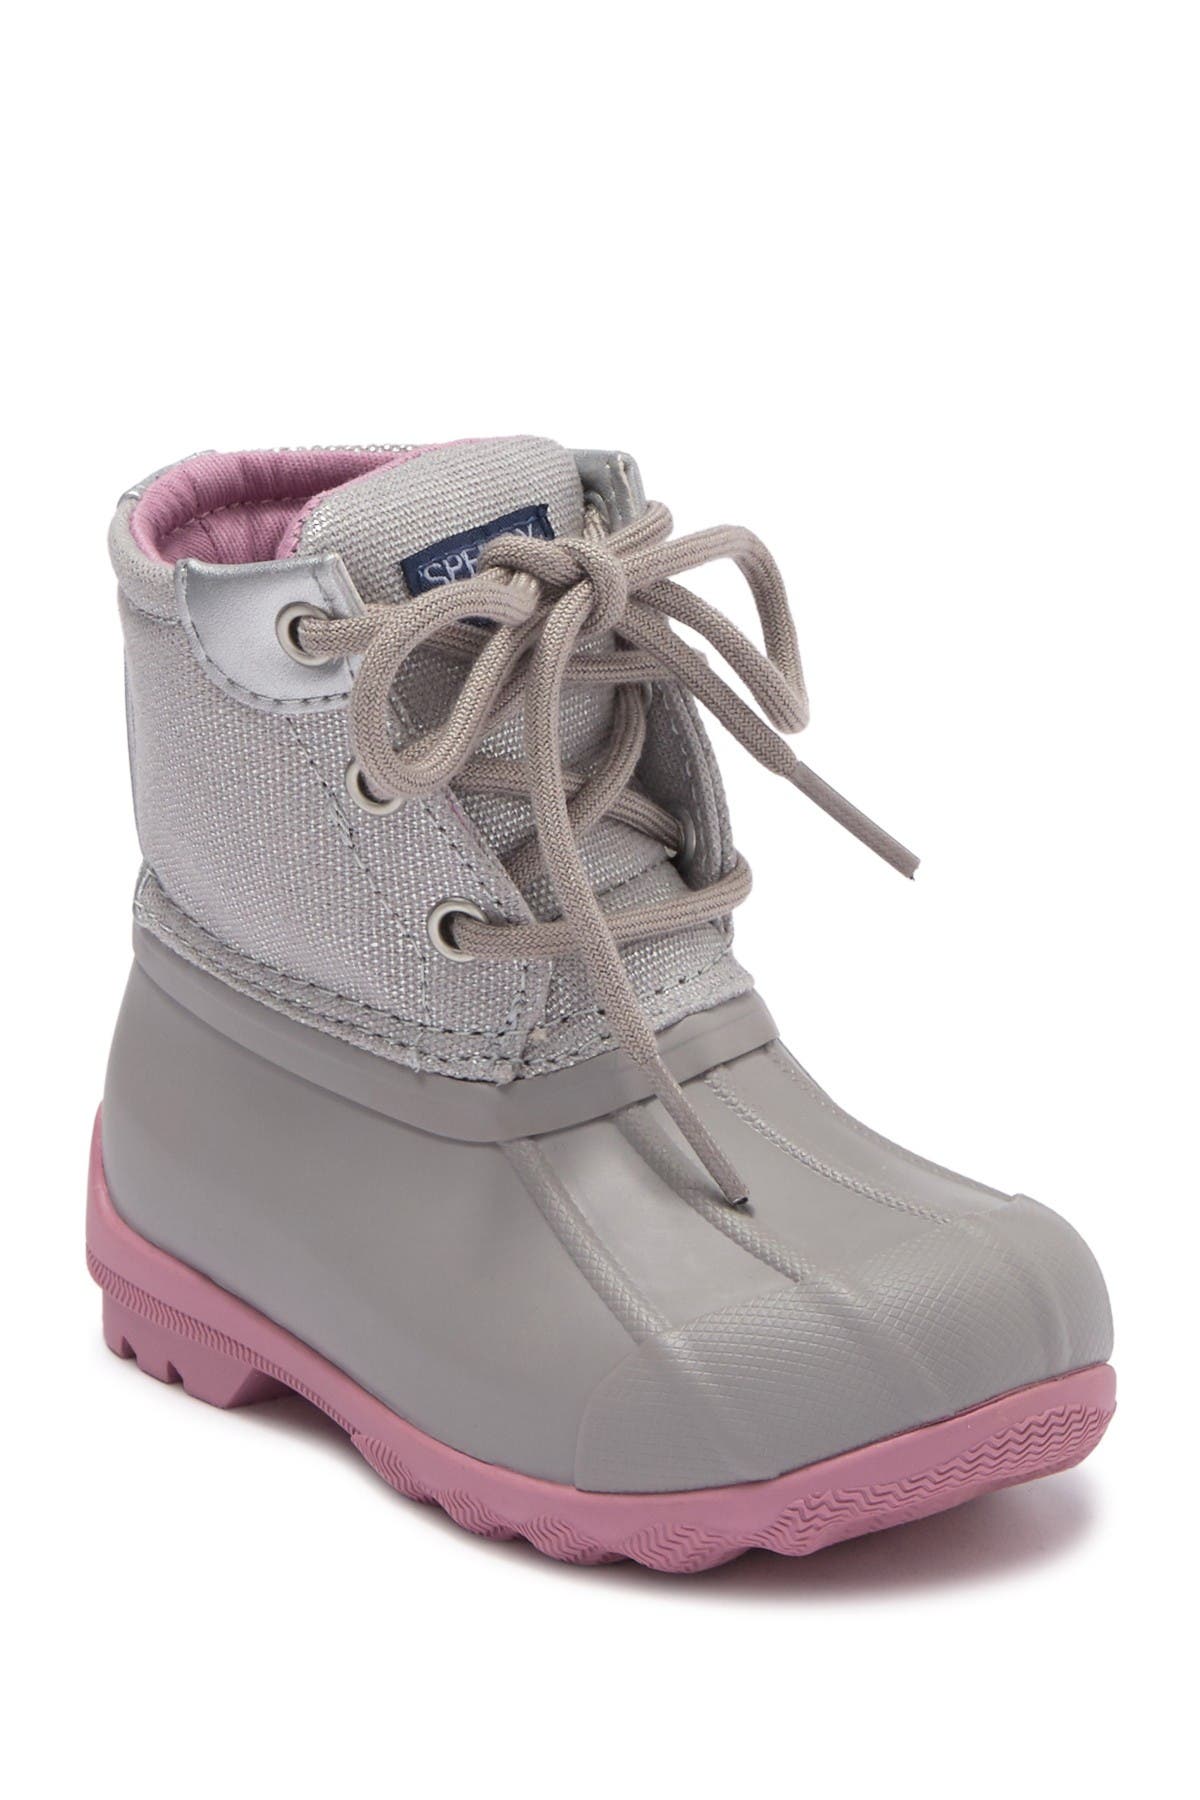 sperry boots for girls